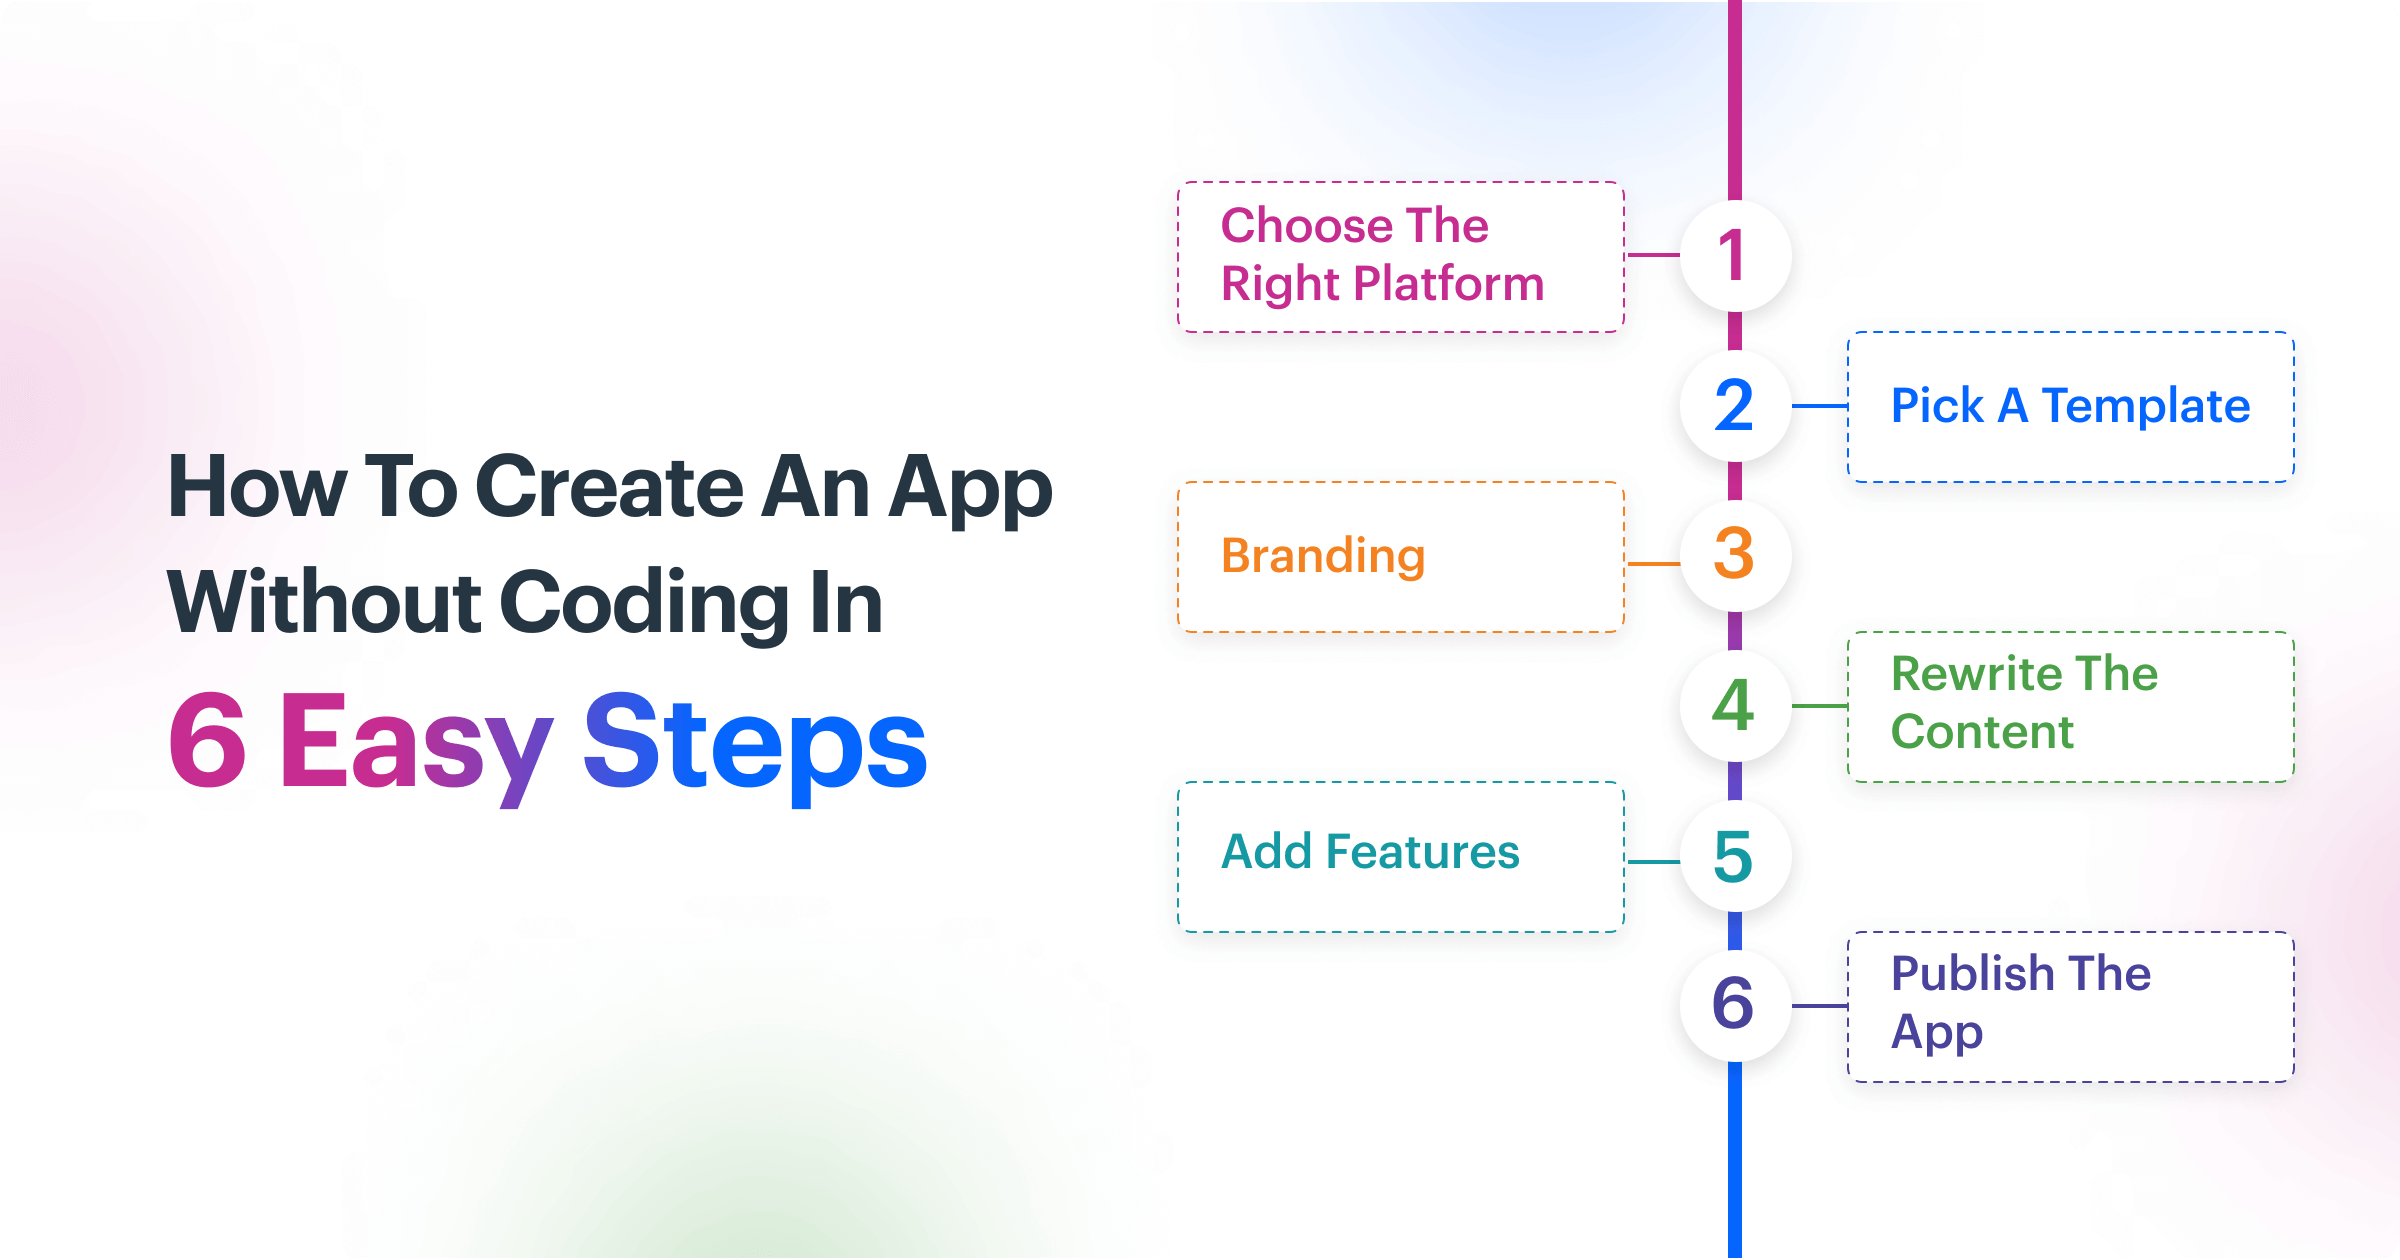 Steps to create an app without coding 